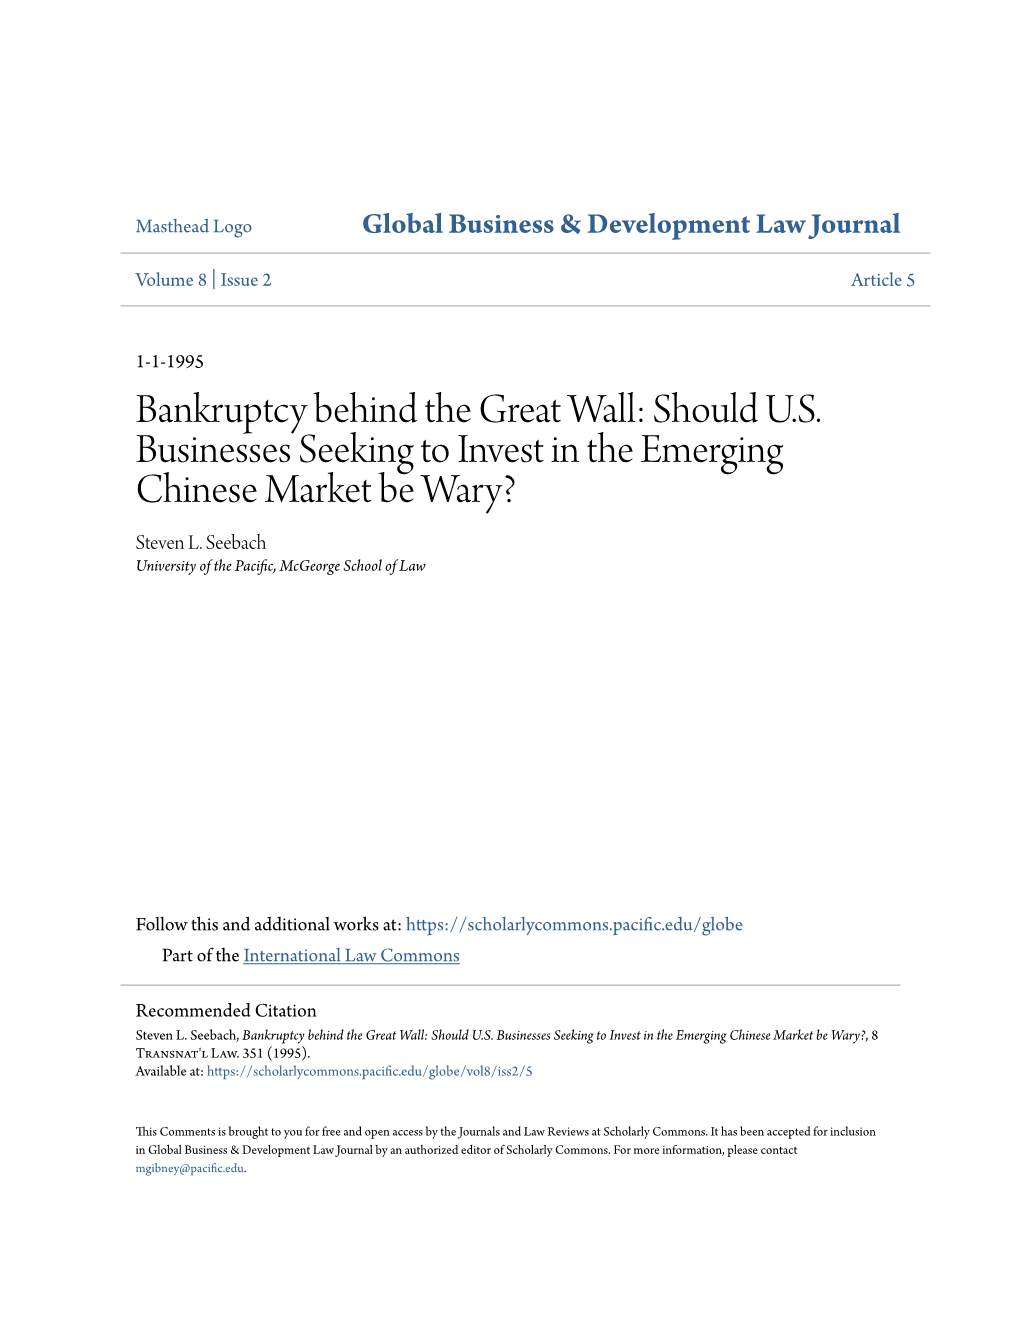 Bankruptcy Behind the Great Wall: Should U.S